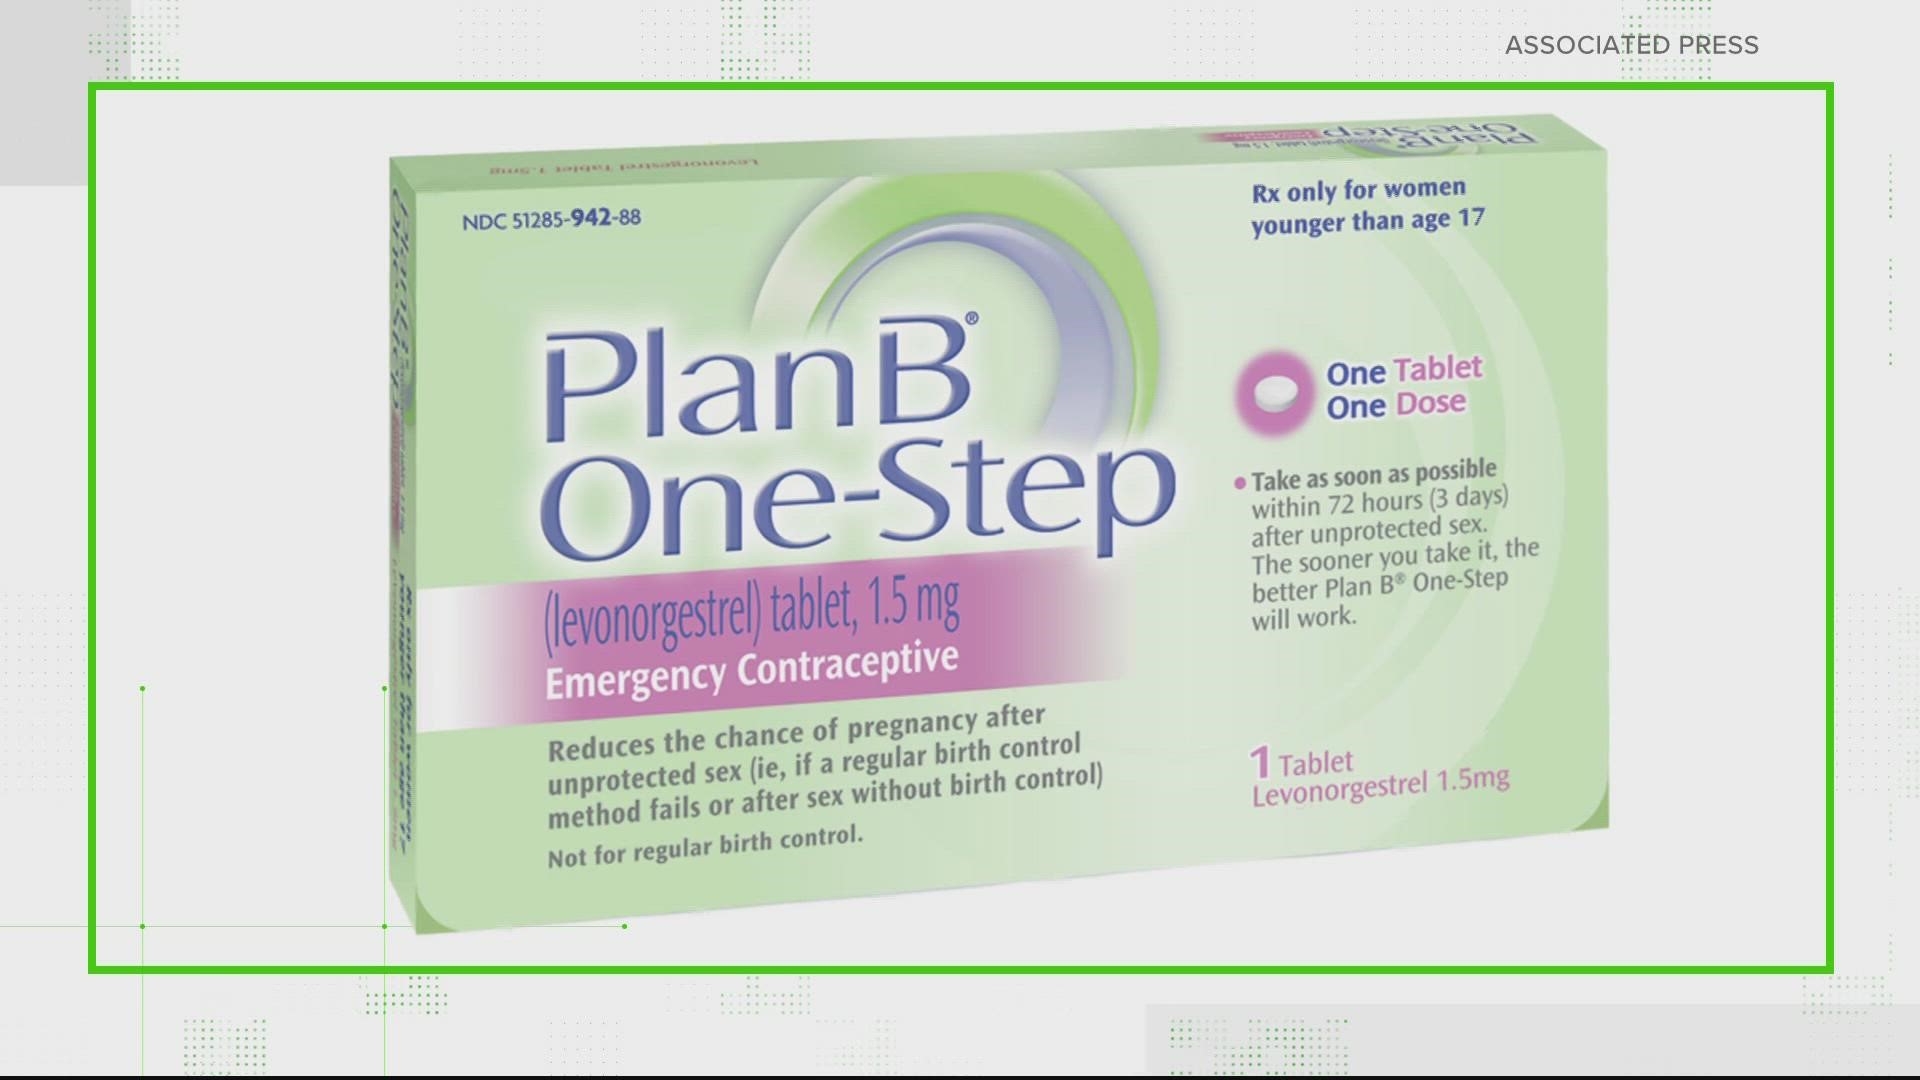 Some stores are capping the sales of the so-called "morning after" pill following the Supreme Court decision overturning Roe v. Wade.